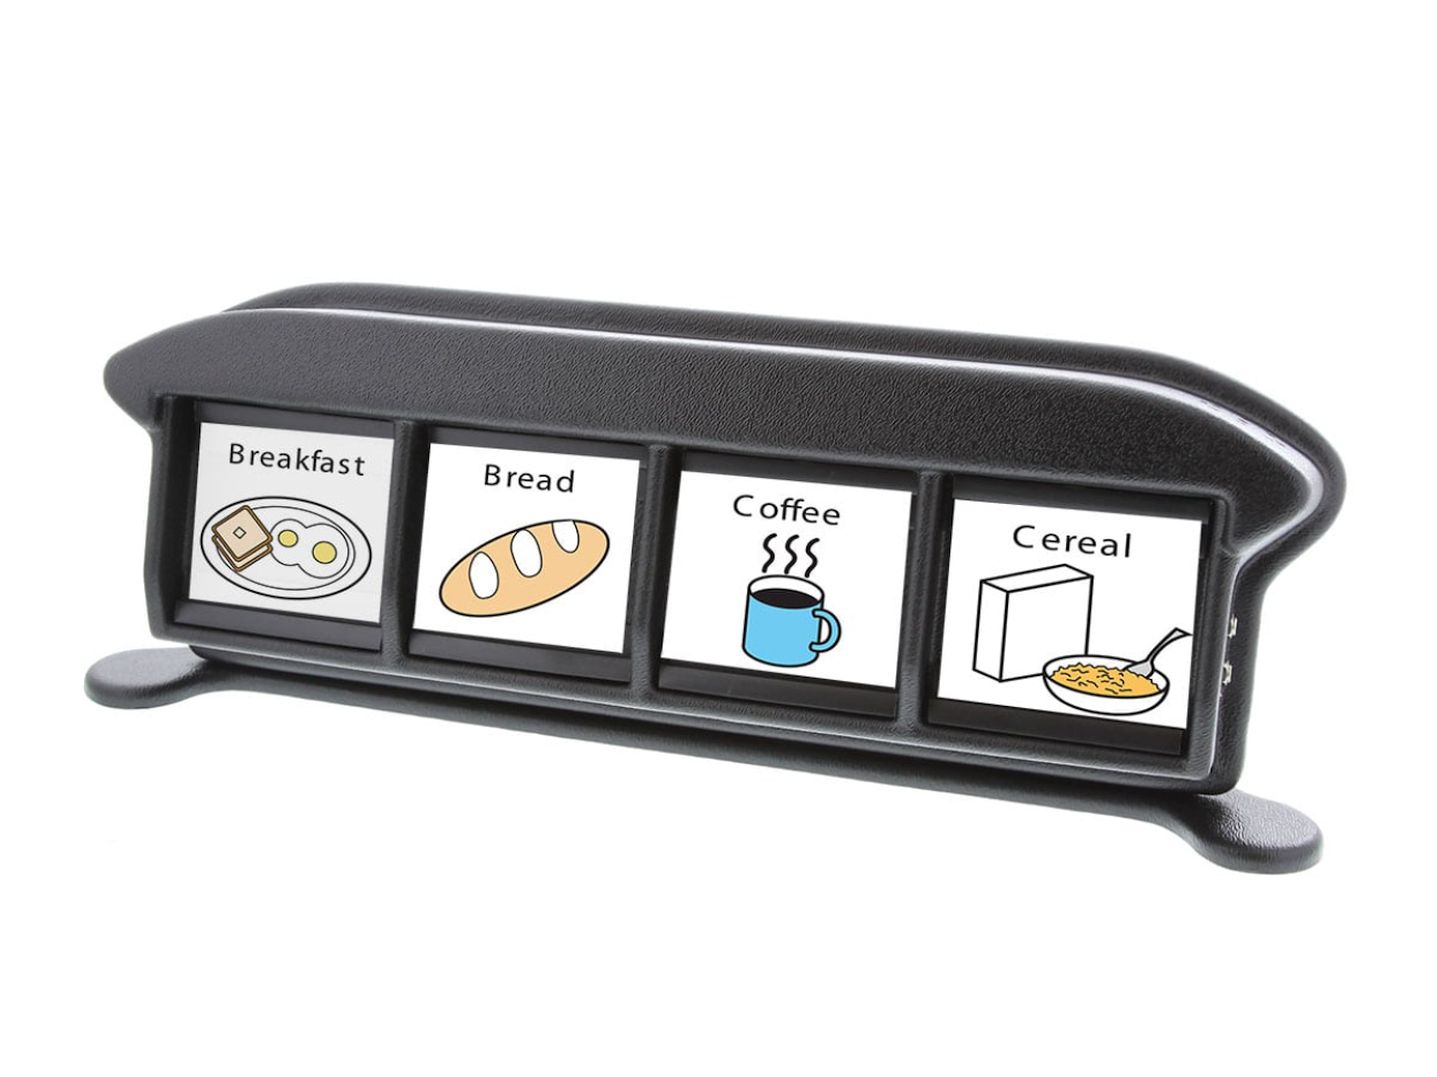 4-Choice Sequential Scanner for the Visually Impaired with base for use on tabletop, attached with 4 pictures cards with illustration of breakfast, bread, coffee and cereal, placed horizontally in their respective 4 fields.